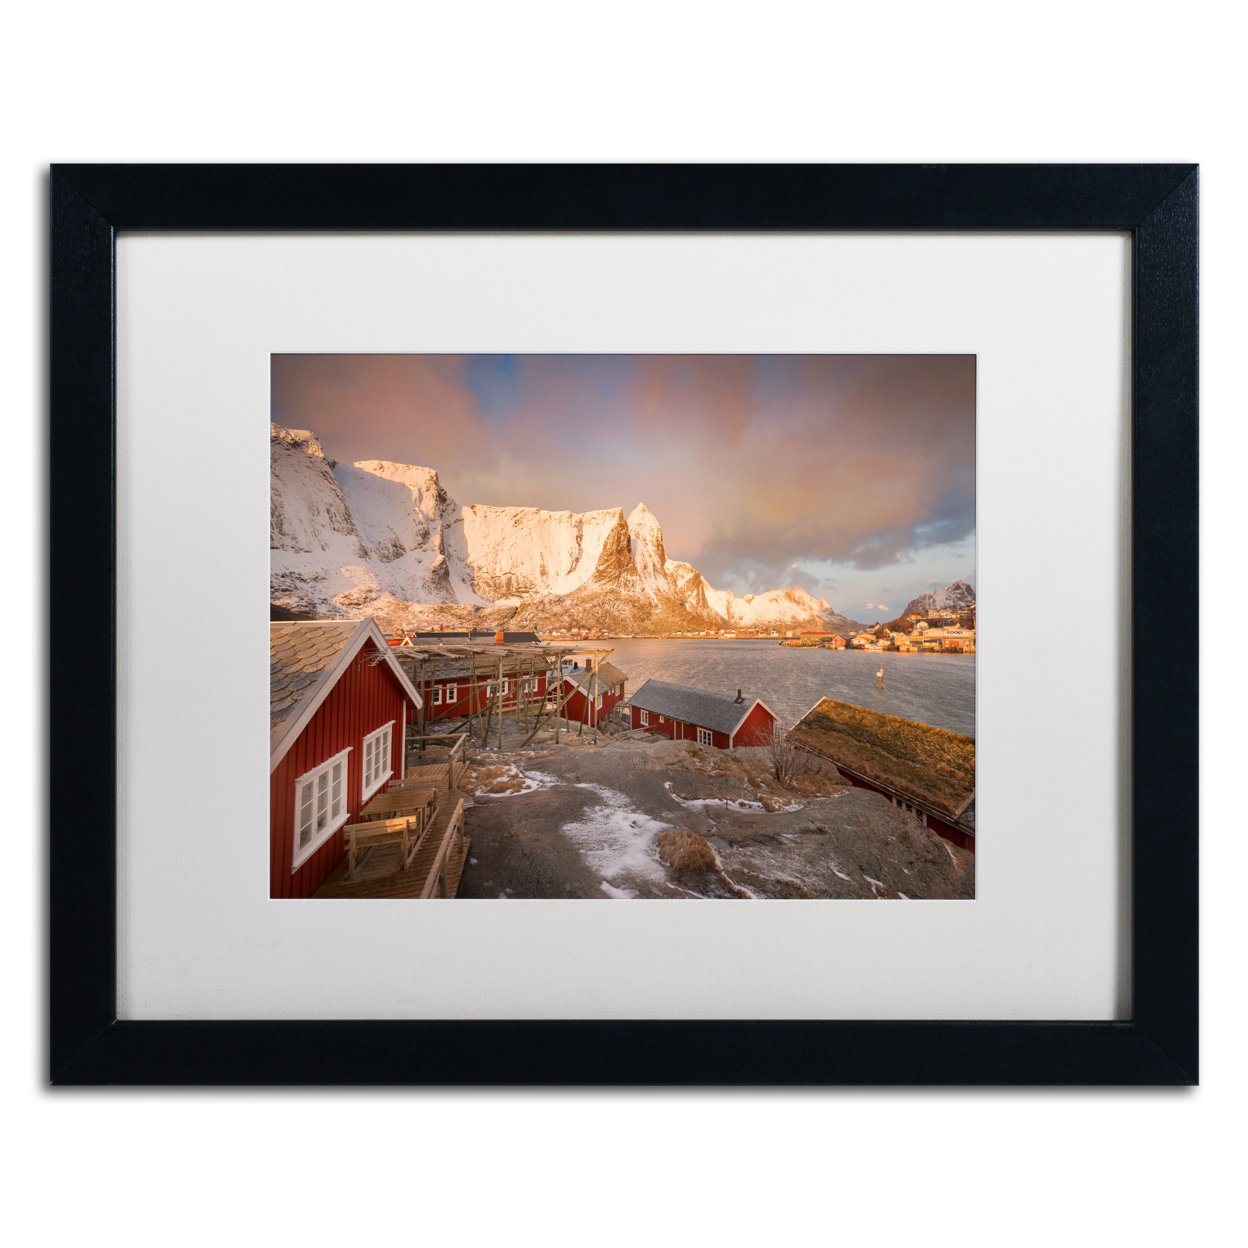 Philippe Sainte-Laudy 'Welcome To Reine' Black Wooden Framed Art 18 X 22 Inches